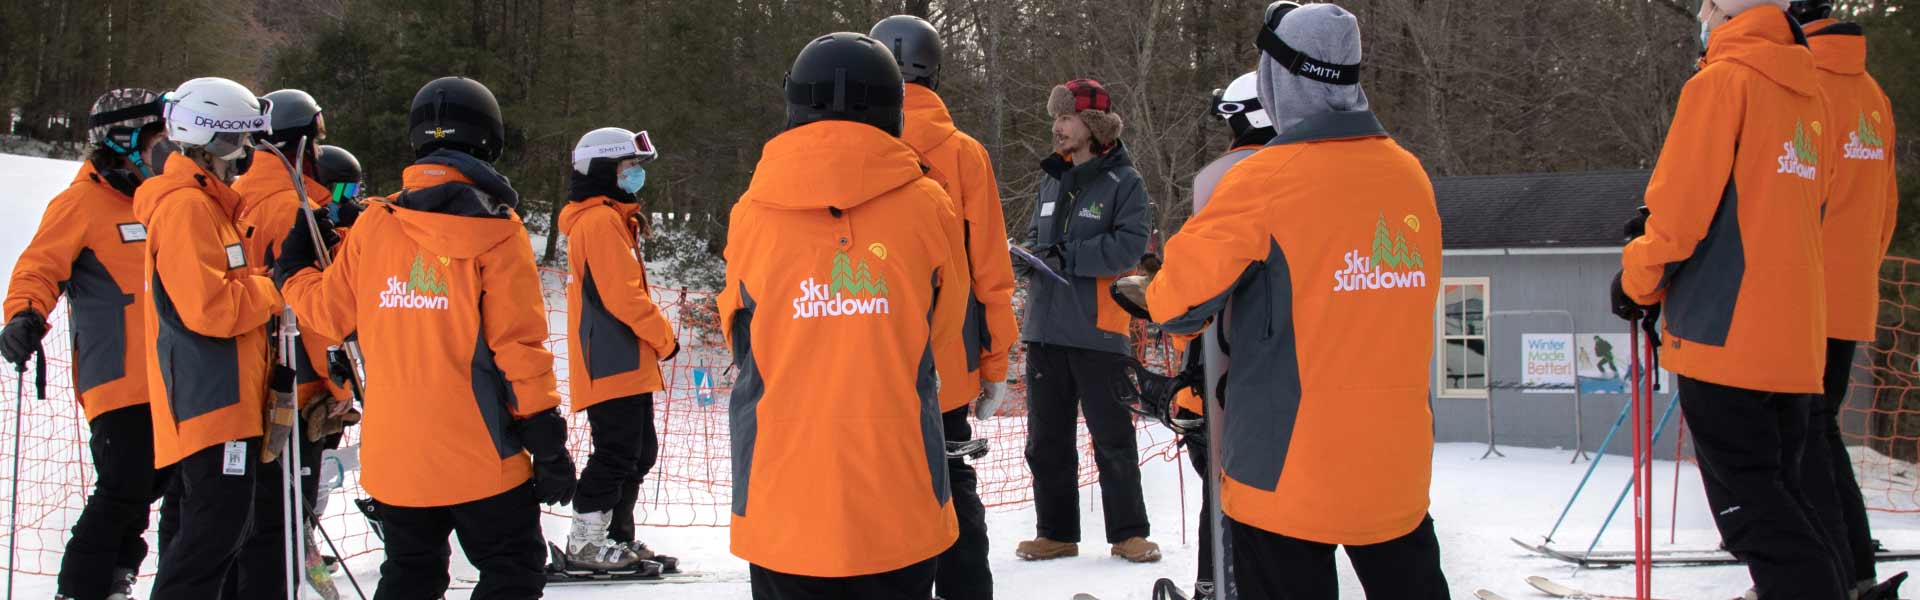 Group of Snowsports instructors